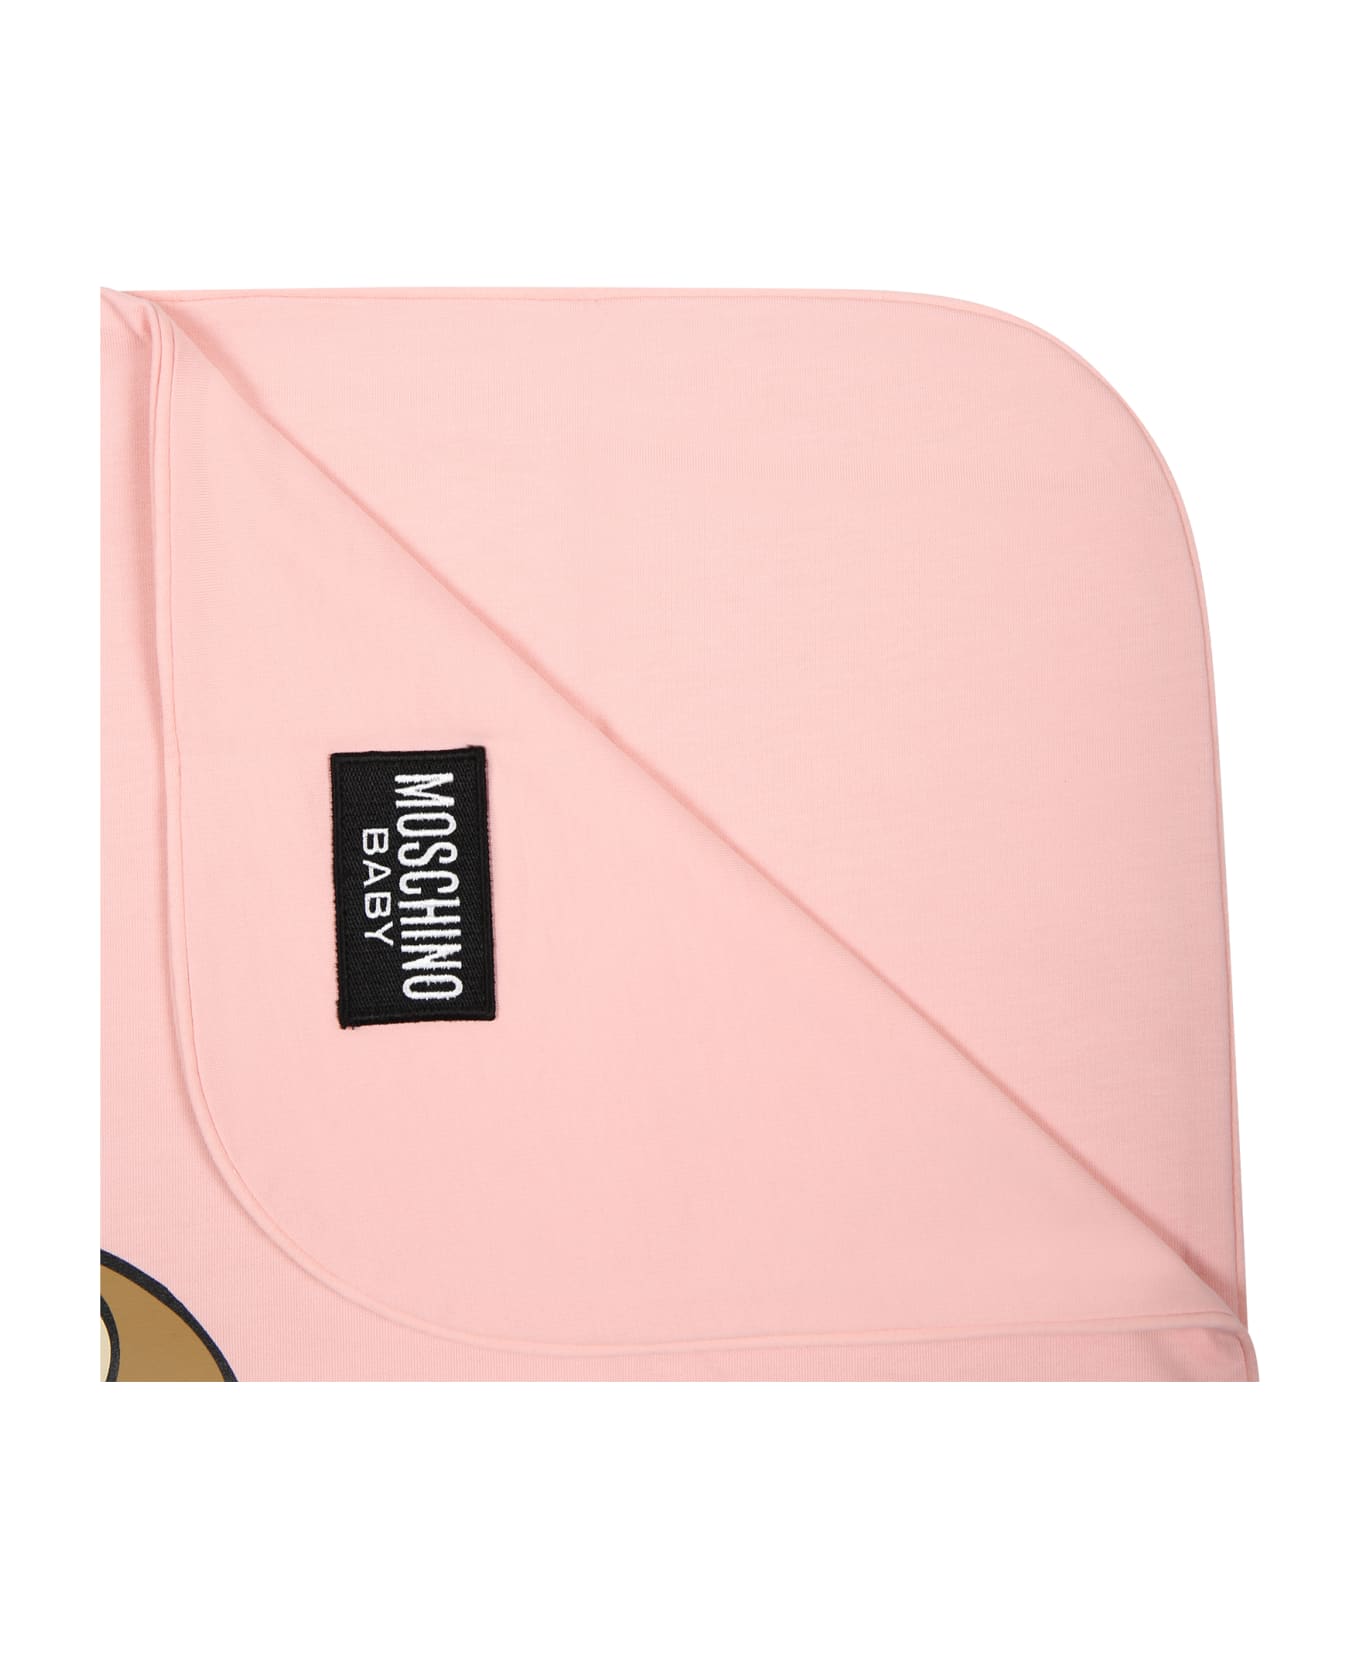 Moschino Ivory Baby Girl Blanket With Teddy Bear And Logo - Pink